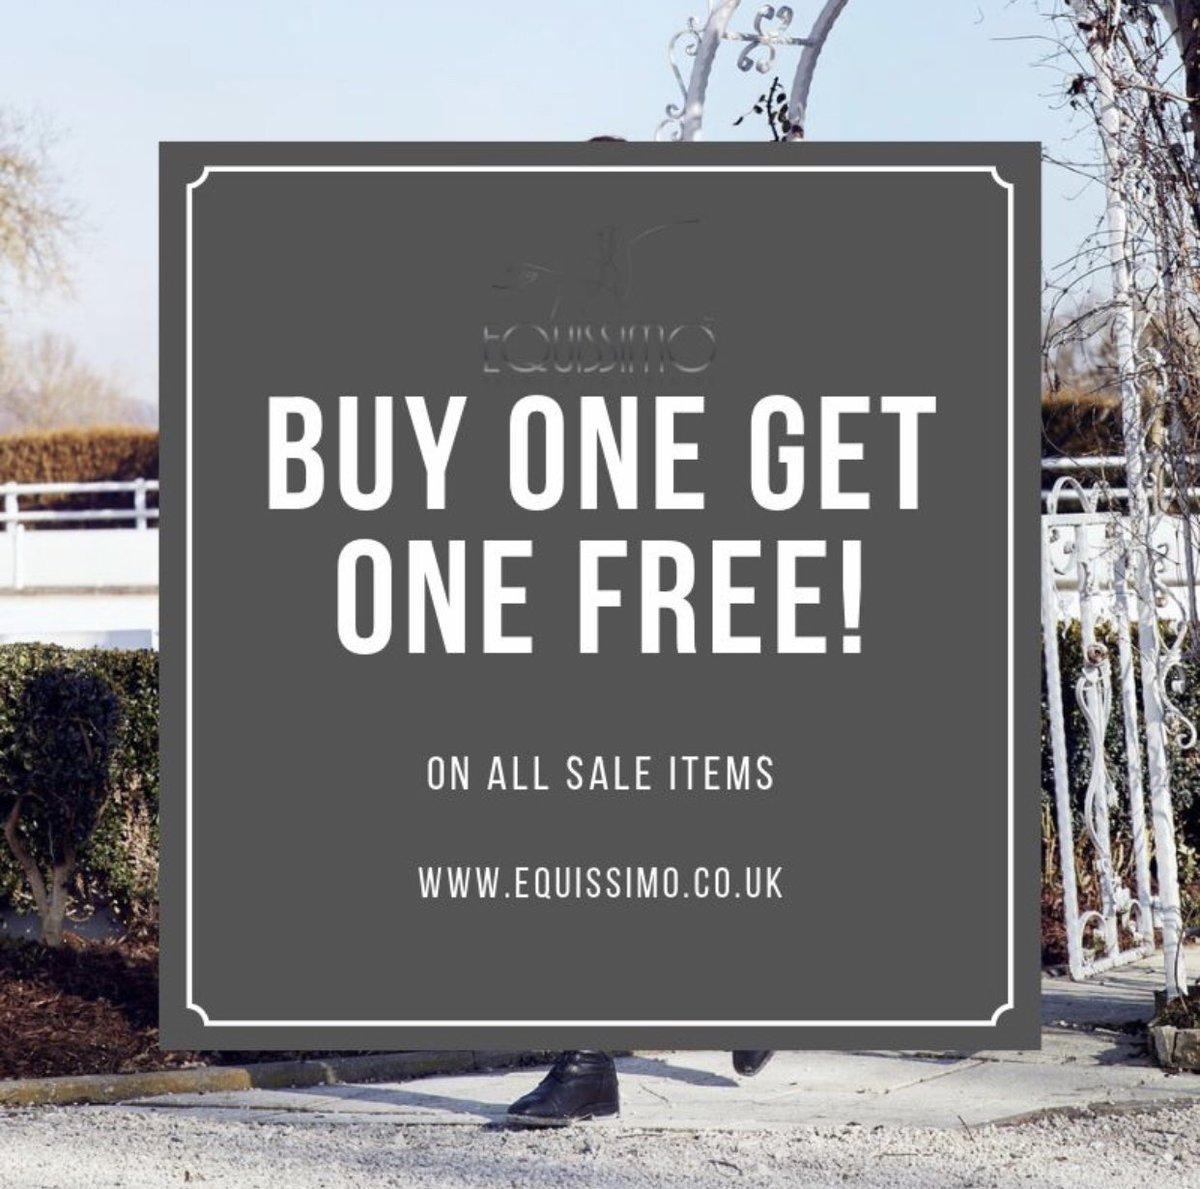 Don't forget the @equissimo sale is still on! Including items from Animo, Miasuki, Montar, Kingsland and more! Just add BOGOF at the checkout #teamequissimo